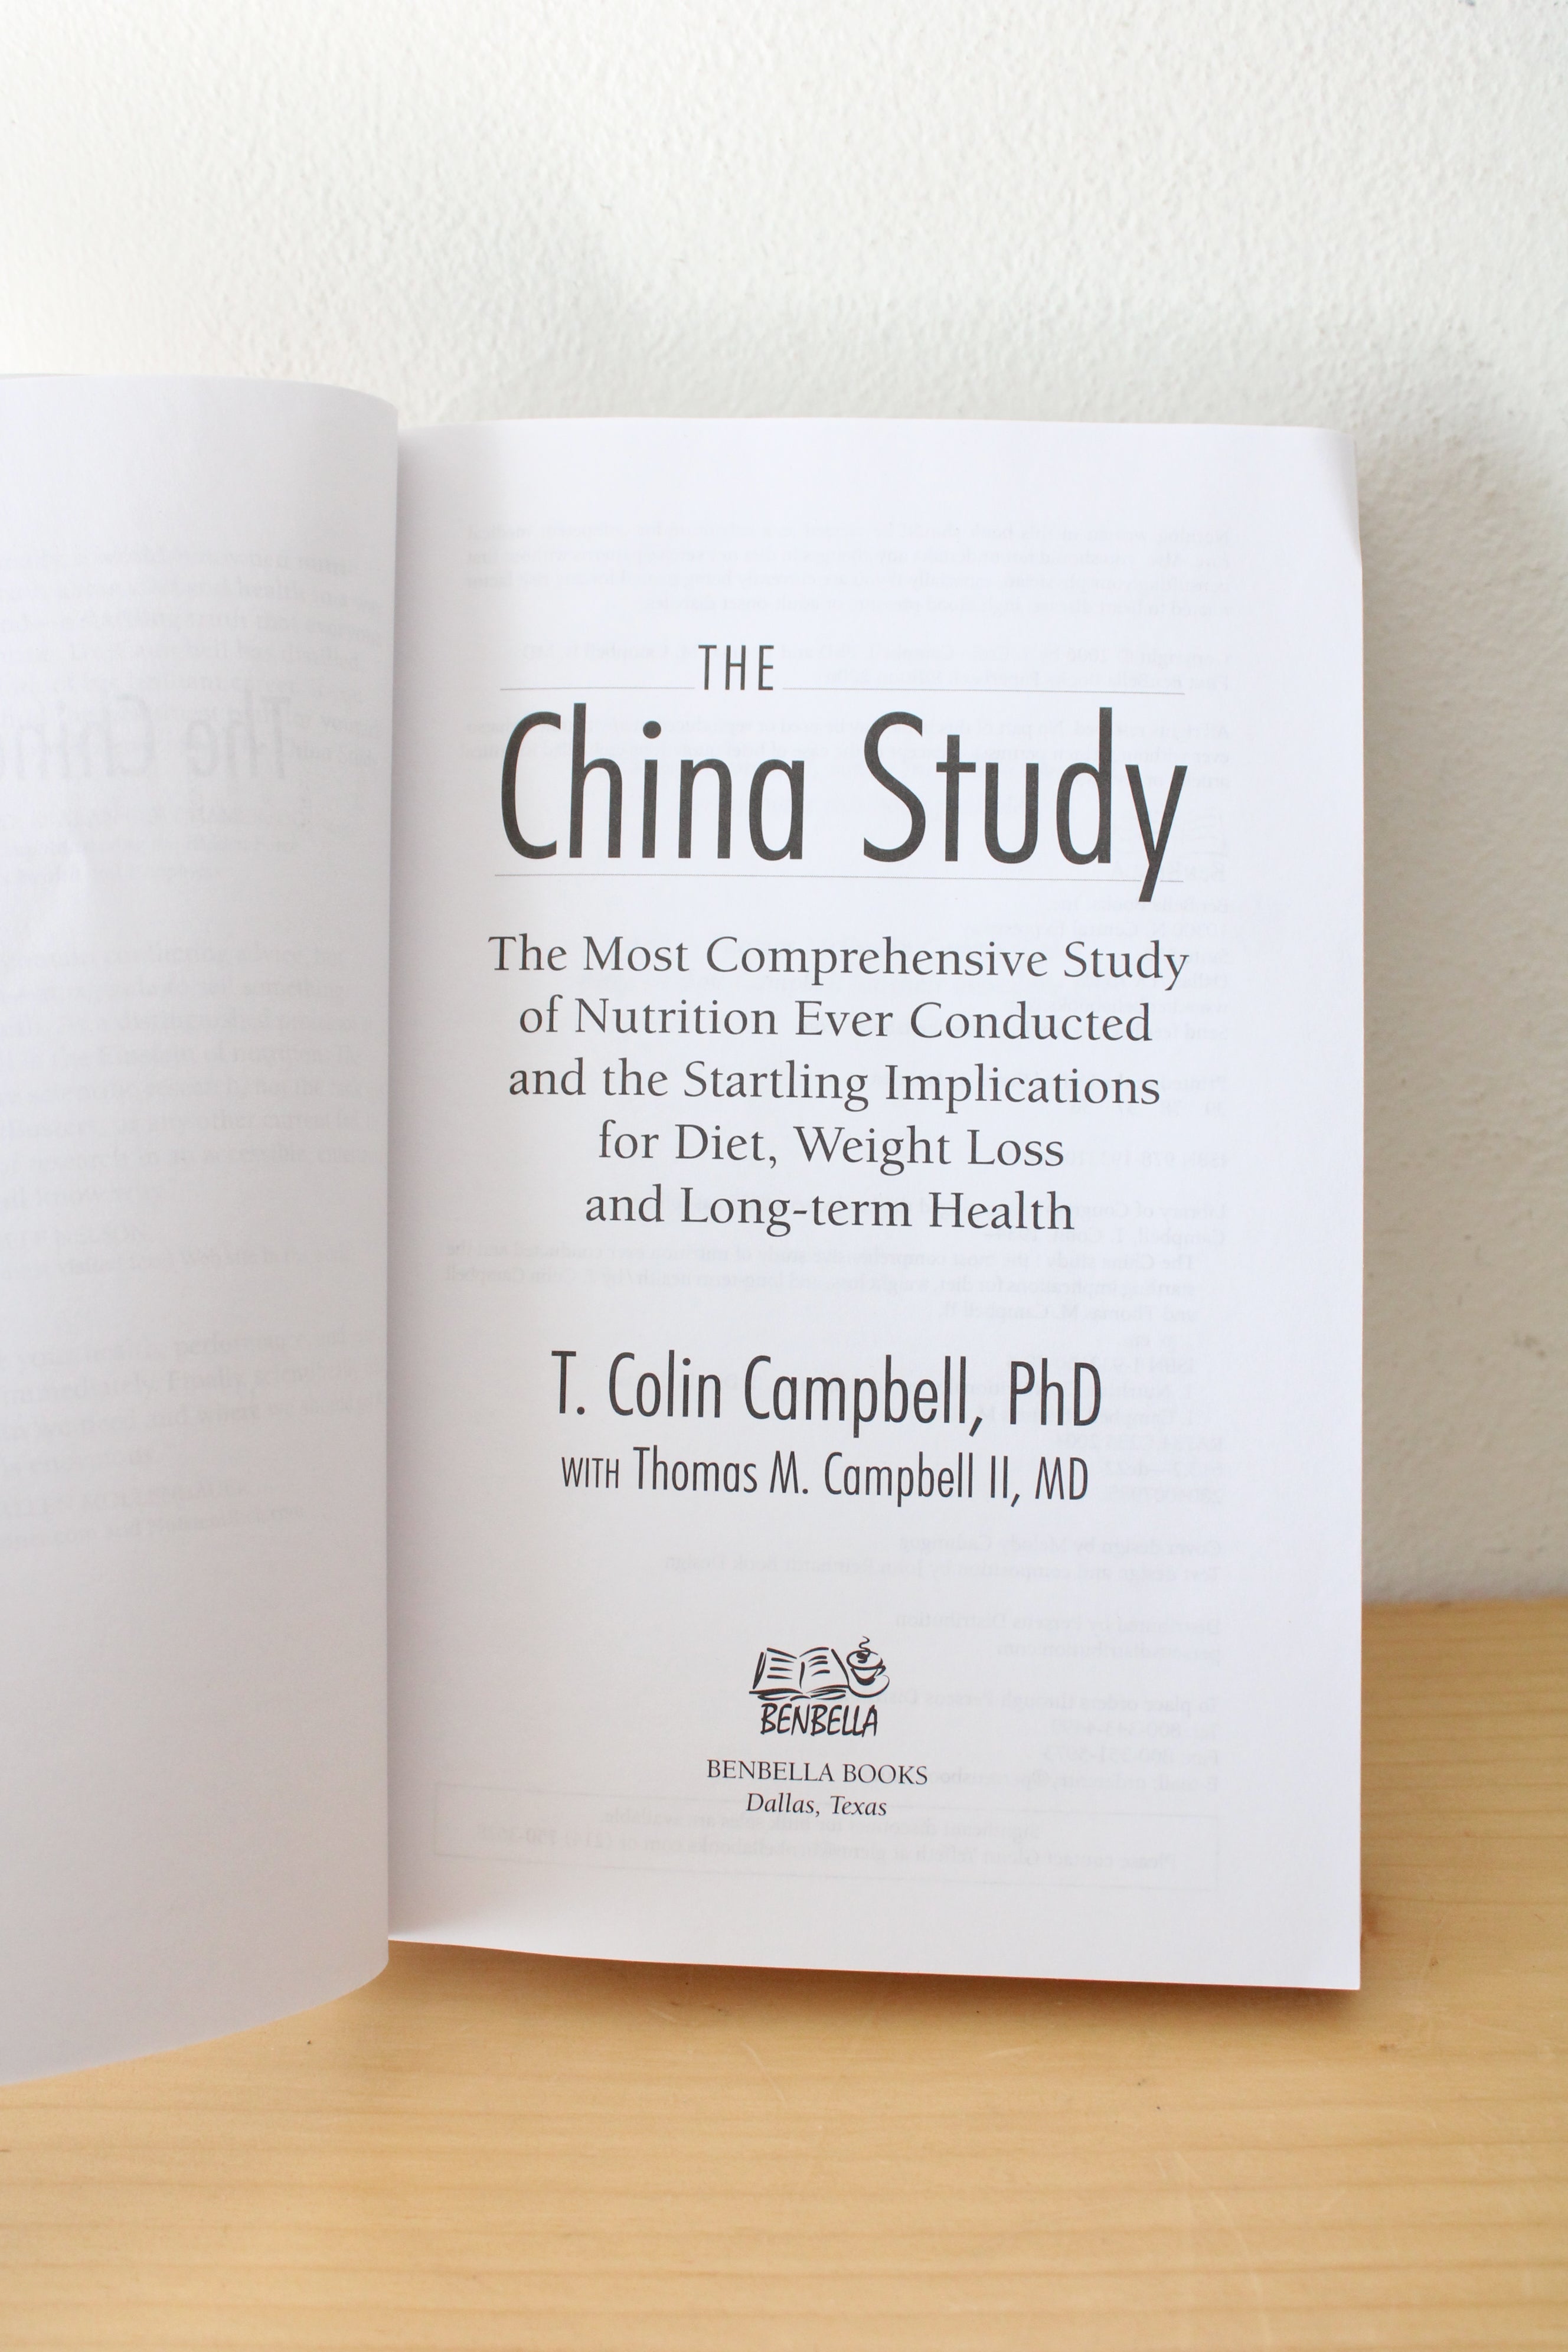 The China Study: Startling Implications For Diet, Weight Loss, & Long-Term Health